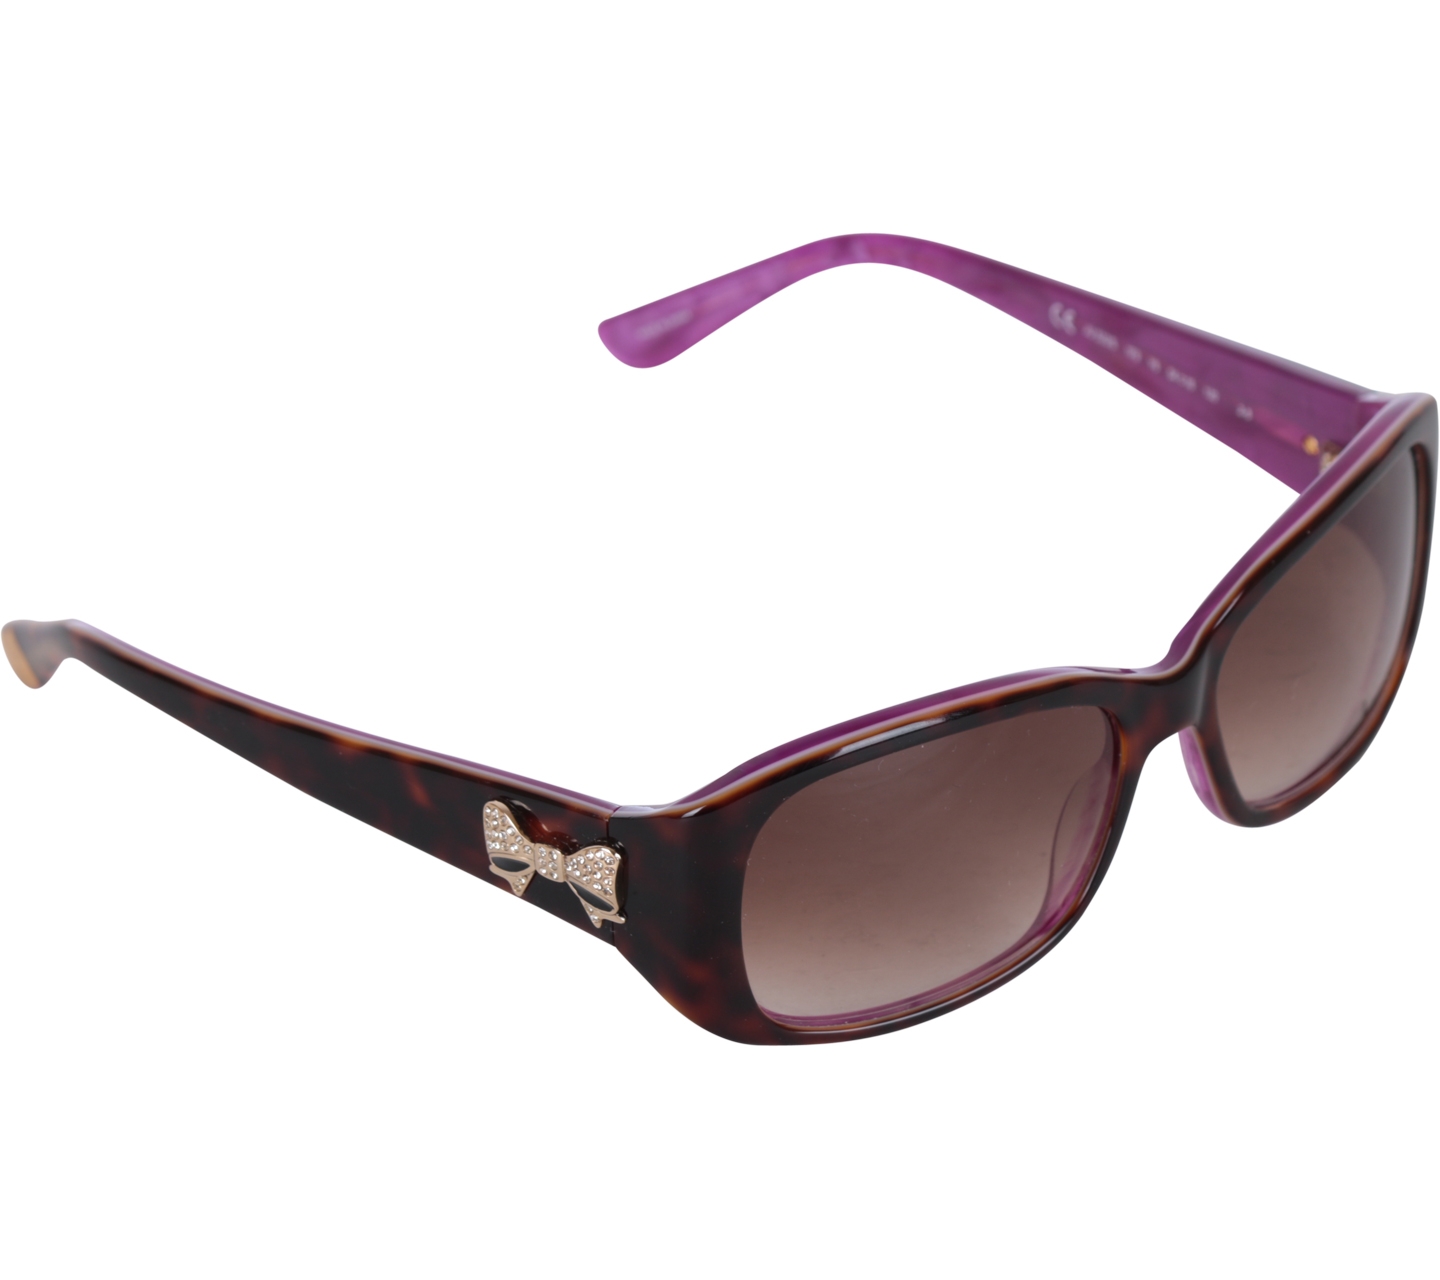 Juicy Couture Purple Shades of Couture Sunglasses